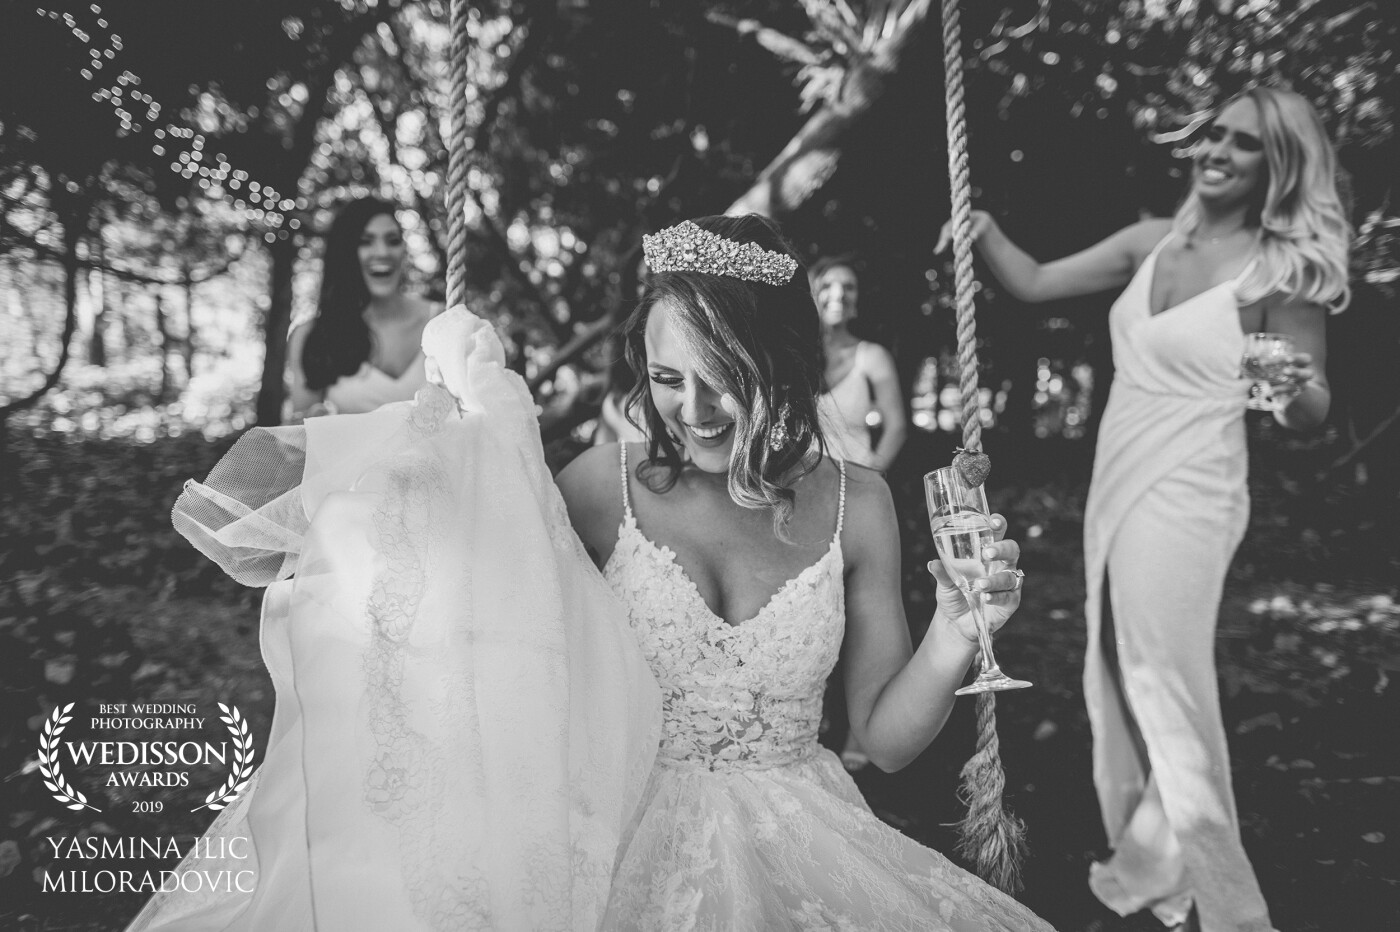 Rachel and Blake wed at Jaspers in Jaspers Brush, on the NSW south coast. I just love this picture of Rachel being pushed on a swing by her lovely bridesmaids. 